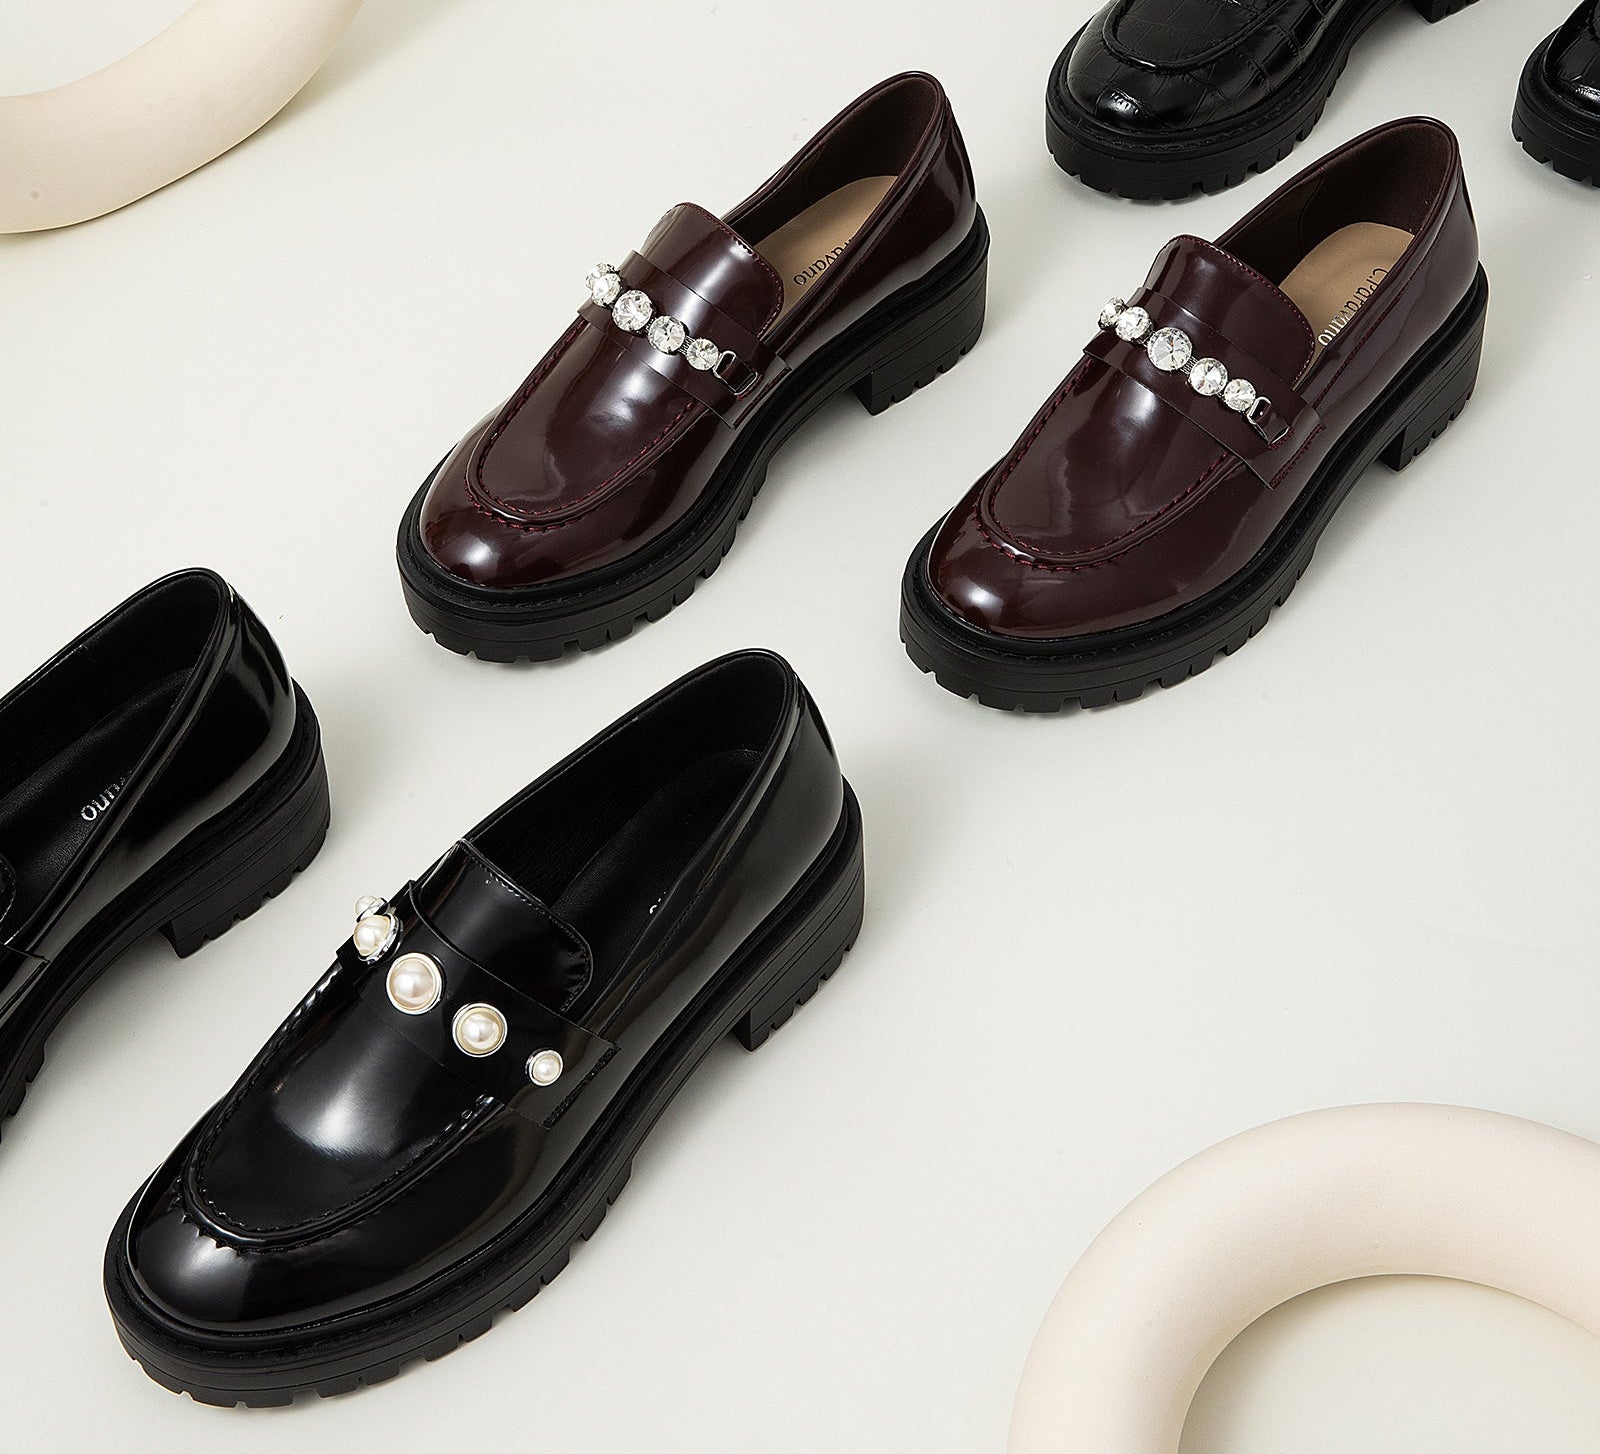 Sleek and Versatile: Pearl Platform Loafers in Black, a timeless and versatile option for everyday elegance